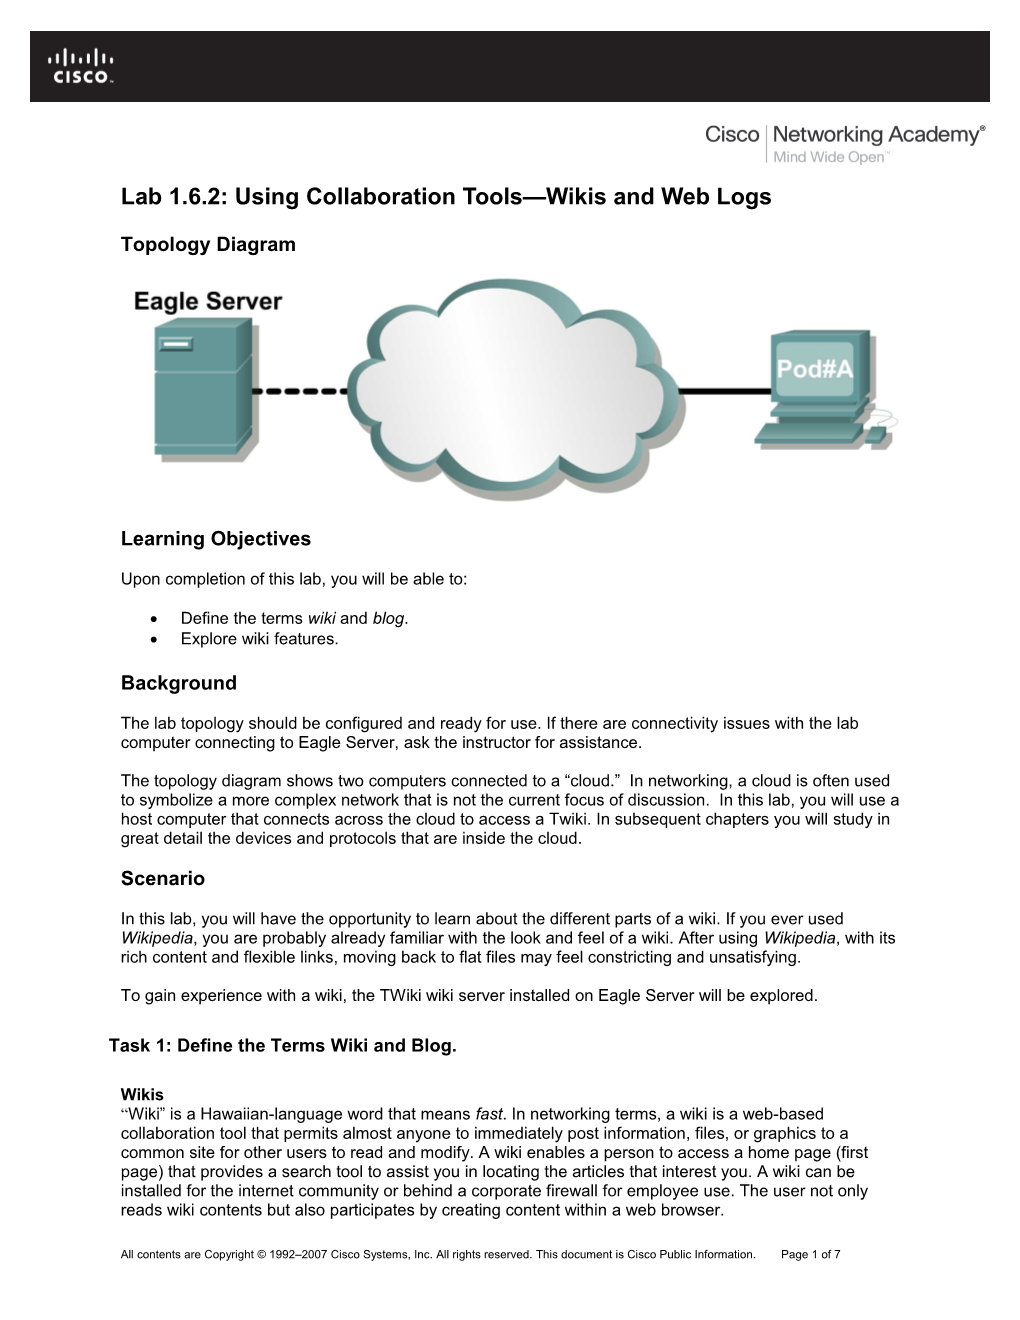 Using Collaboration Tools- Wikis and Web Logs